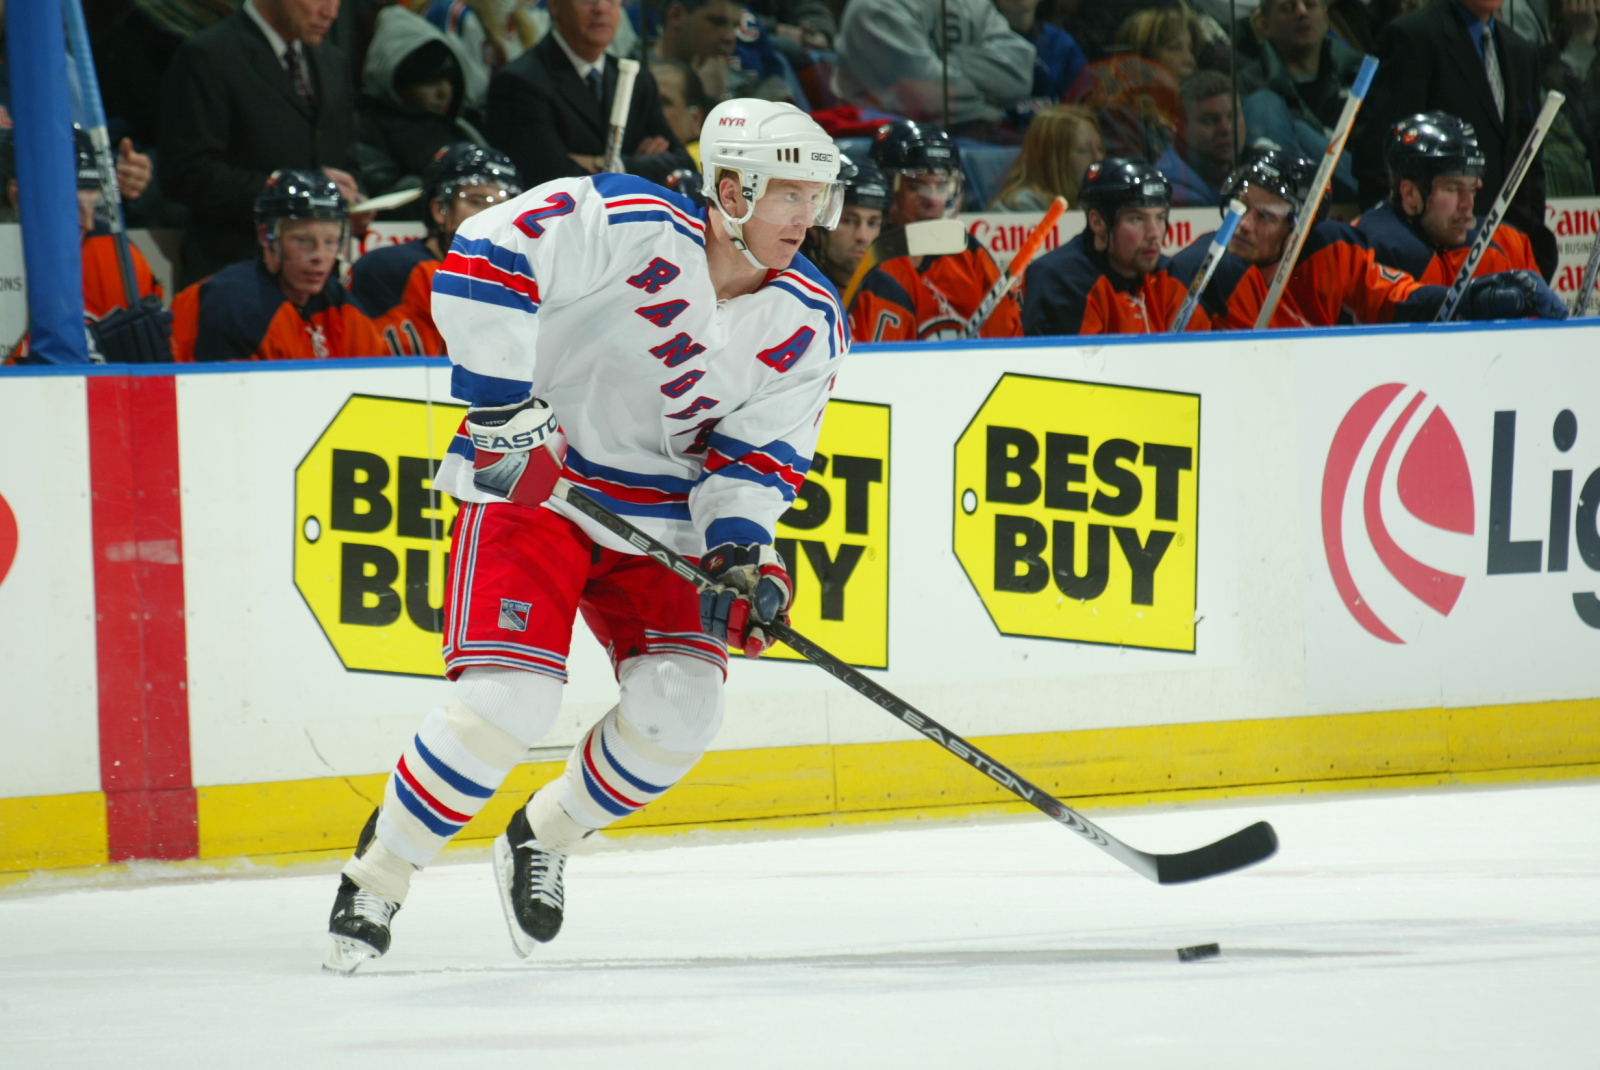 30 Brilliant Facts About Brian Leetch You Didn't Know Before